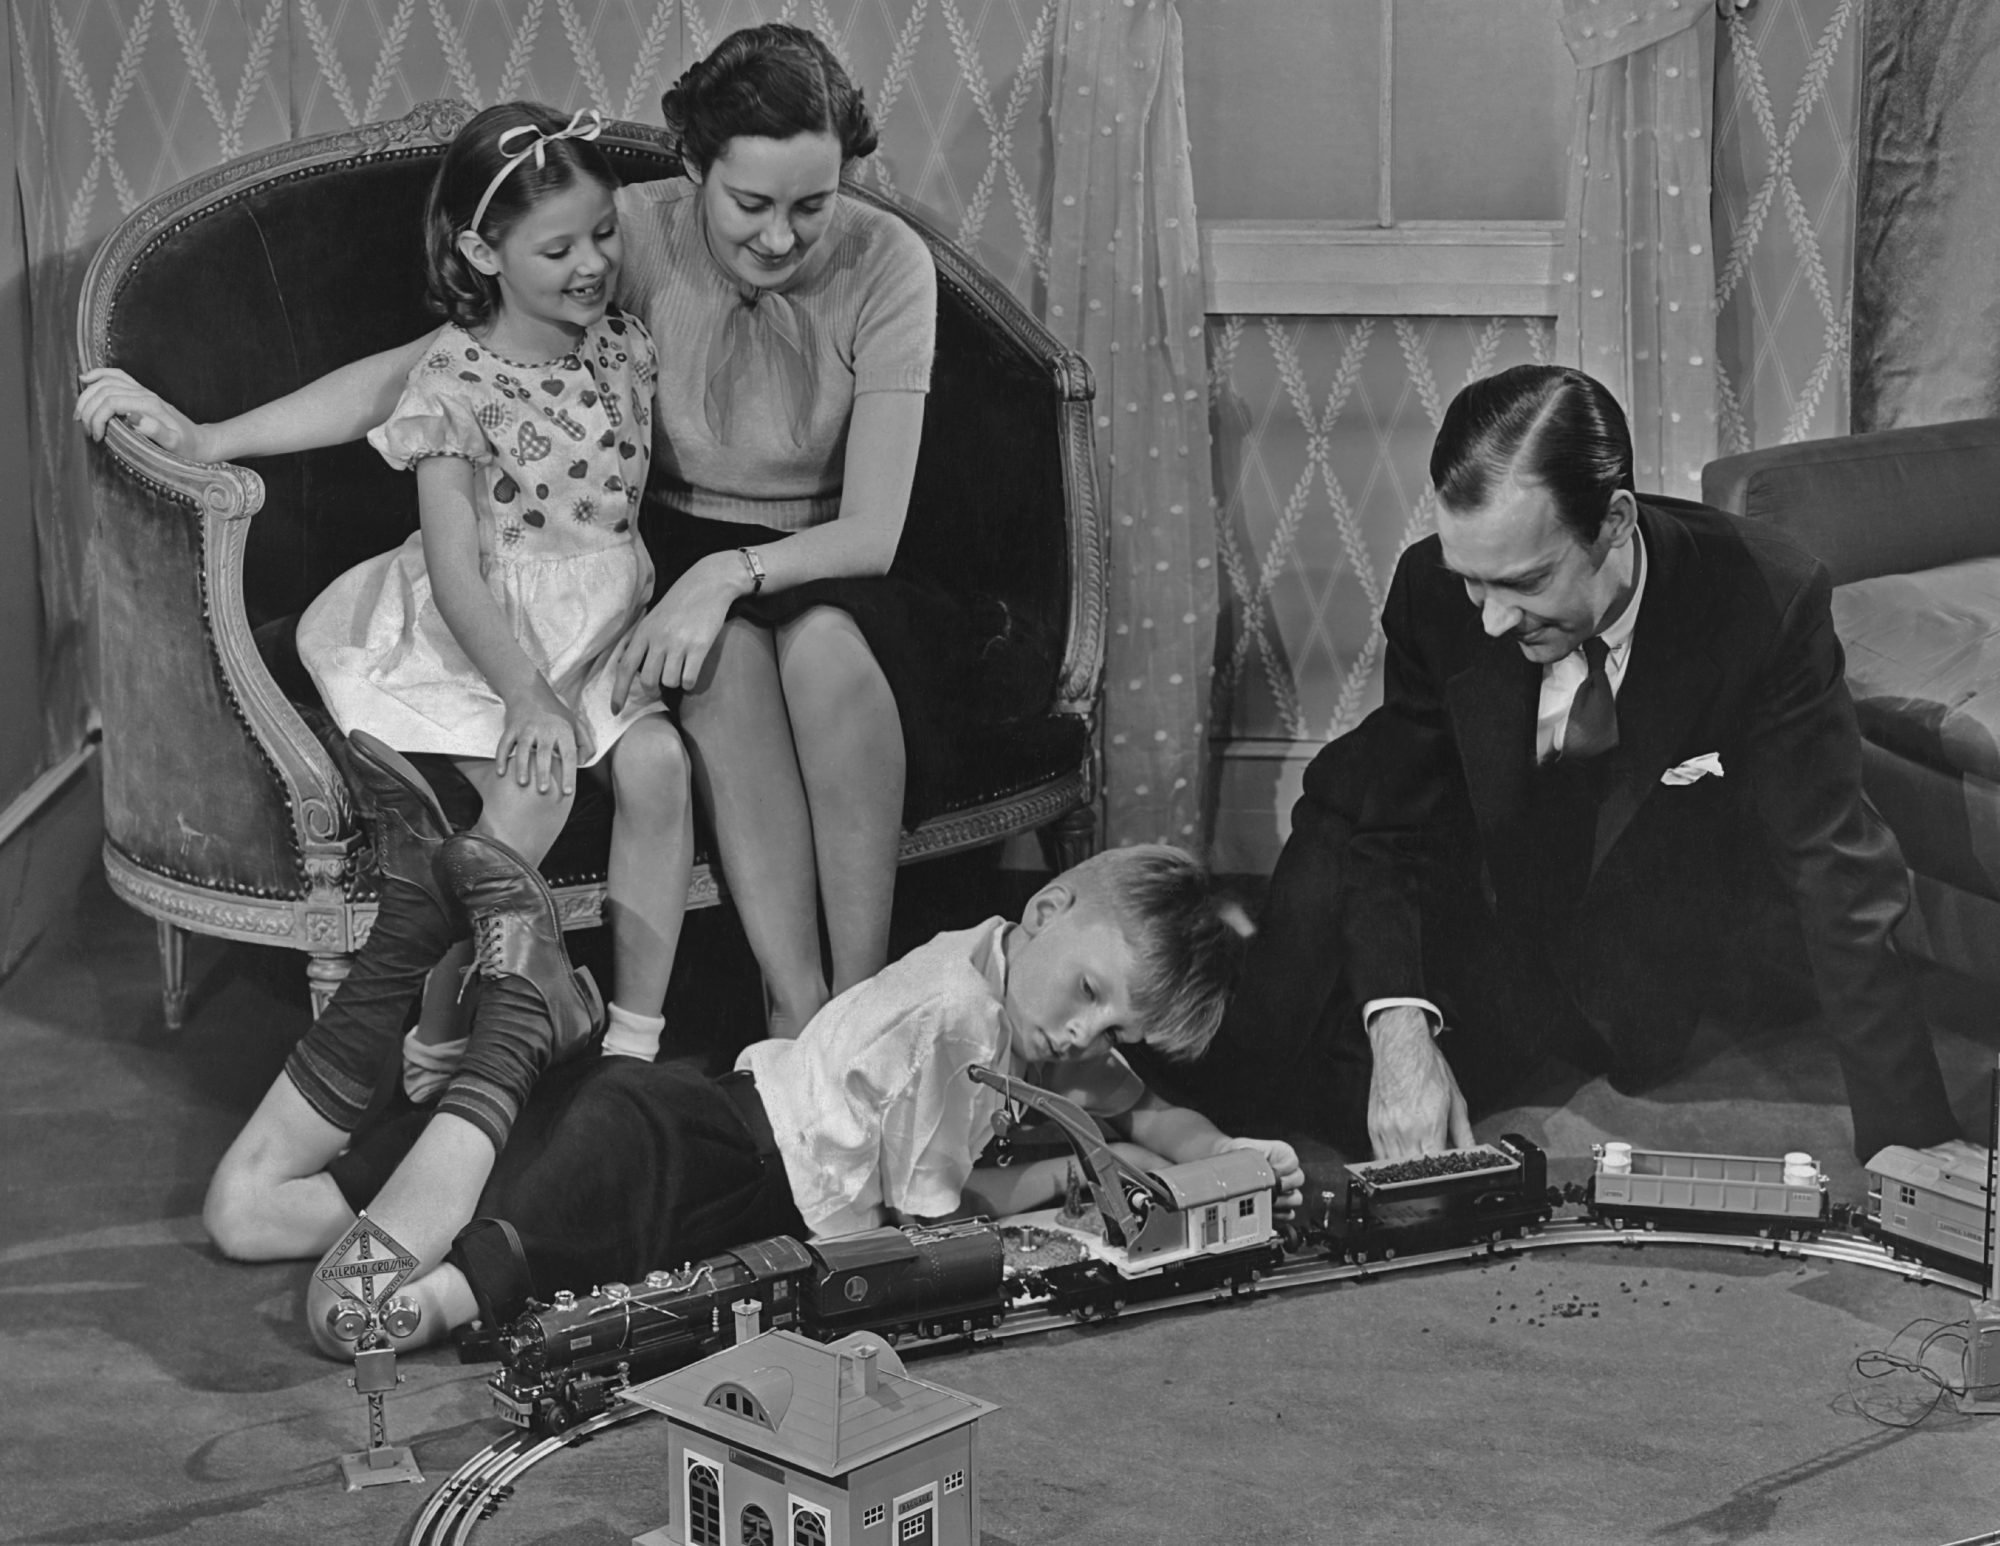 Father and son play with a toy train set as mother and daughter look on circa 1940's.